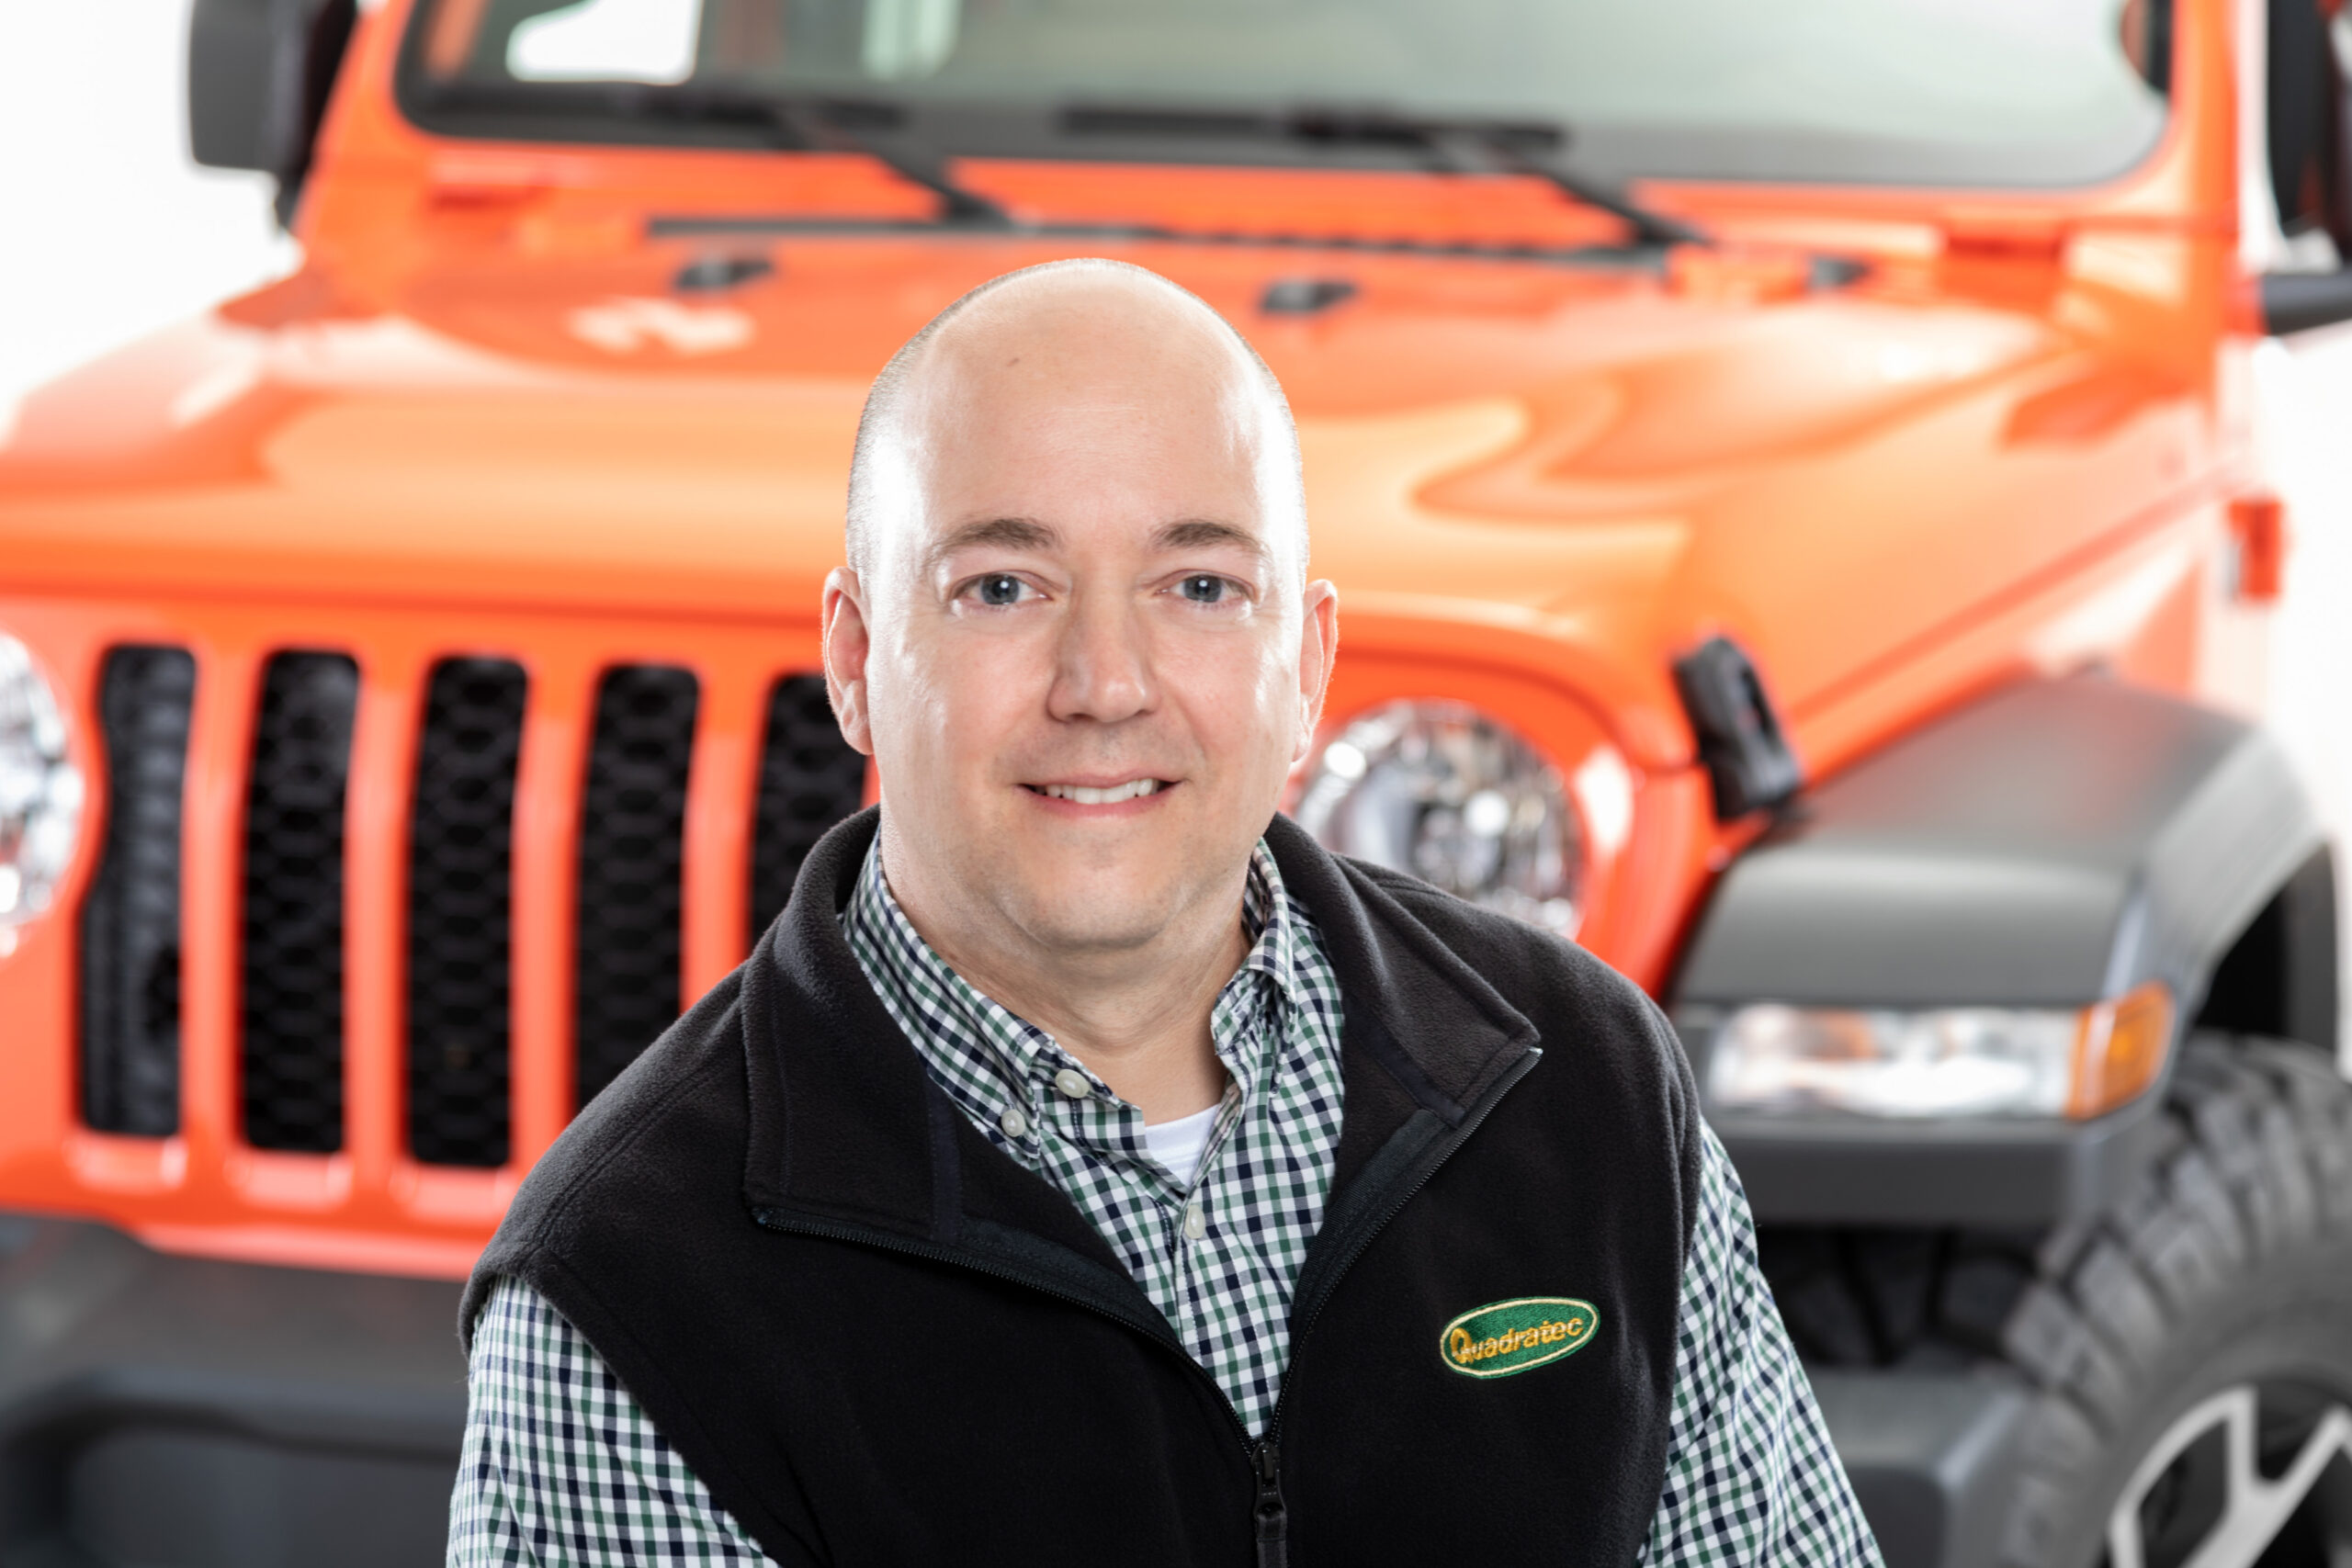 Quadratec Promotes Dan Myers to Director of Technology | THE SHOP